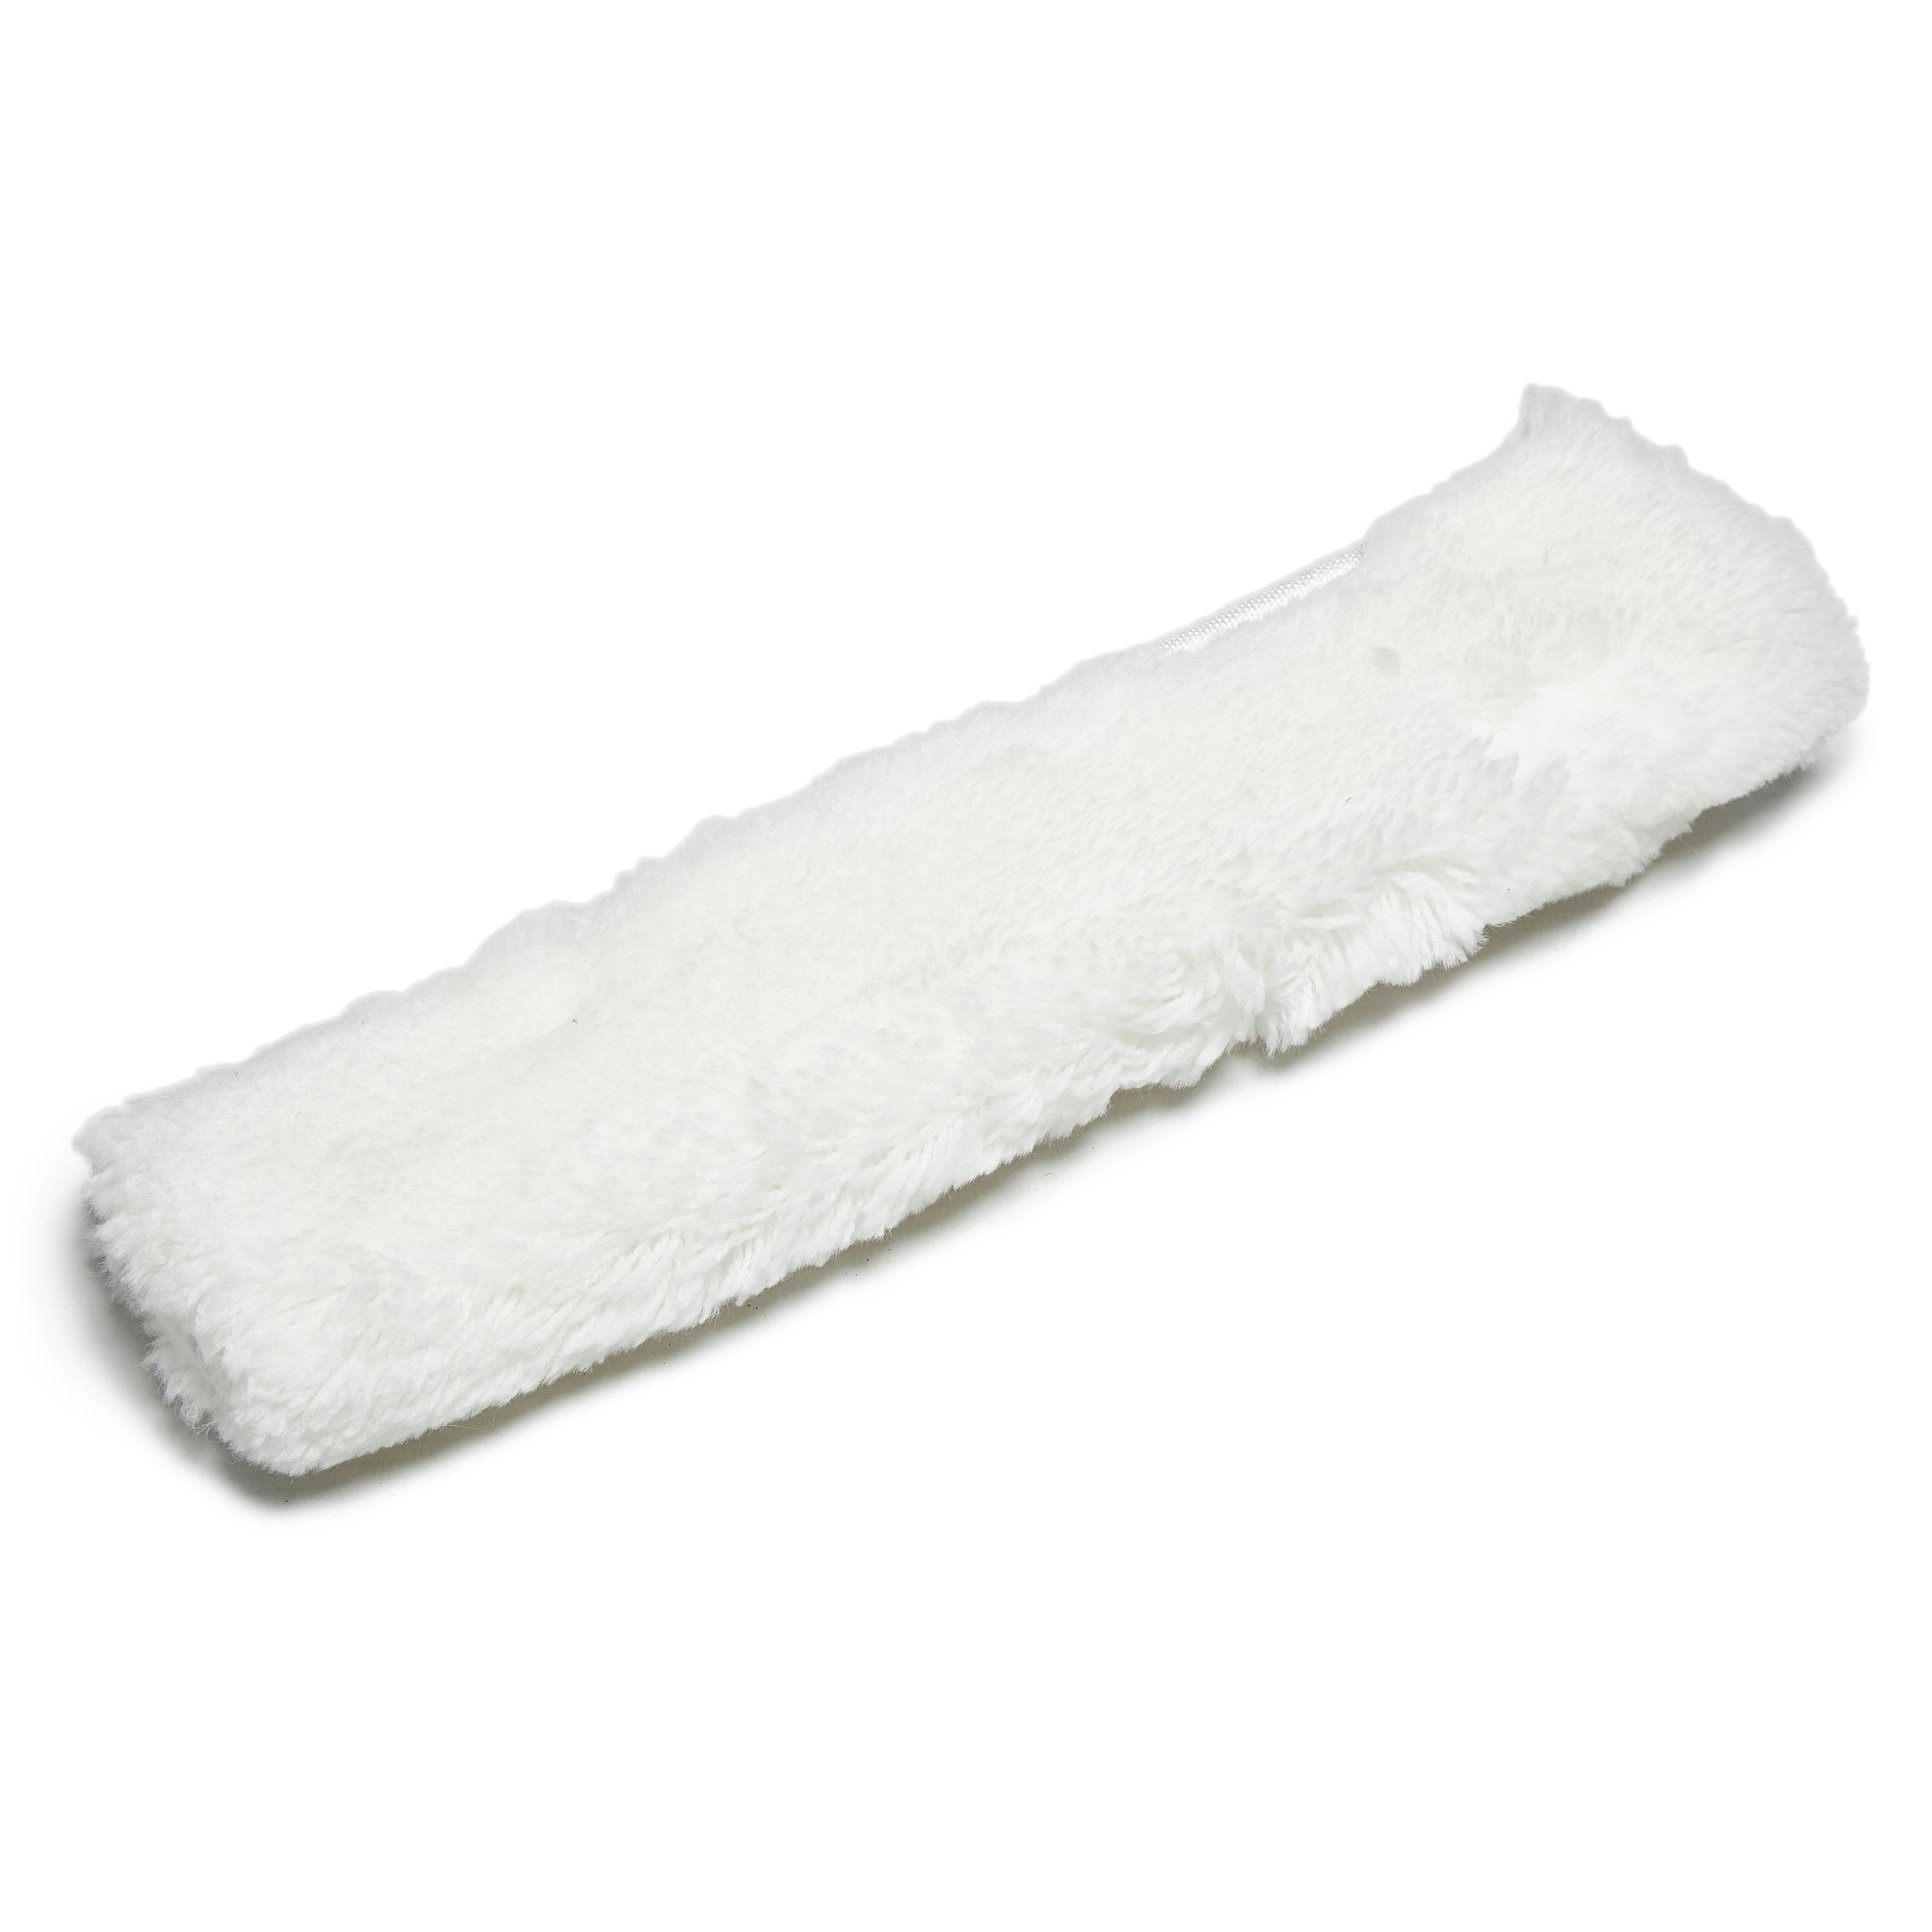 Window scrubber replacement, (W)250mm